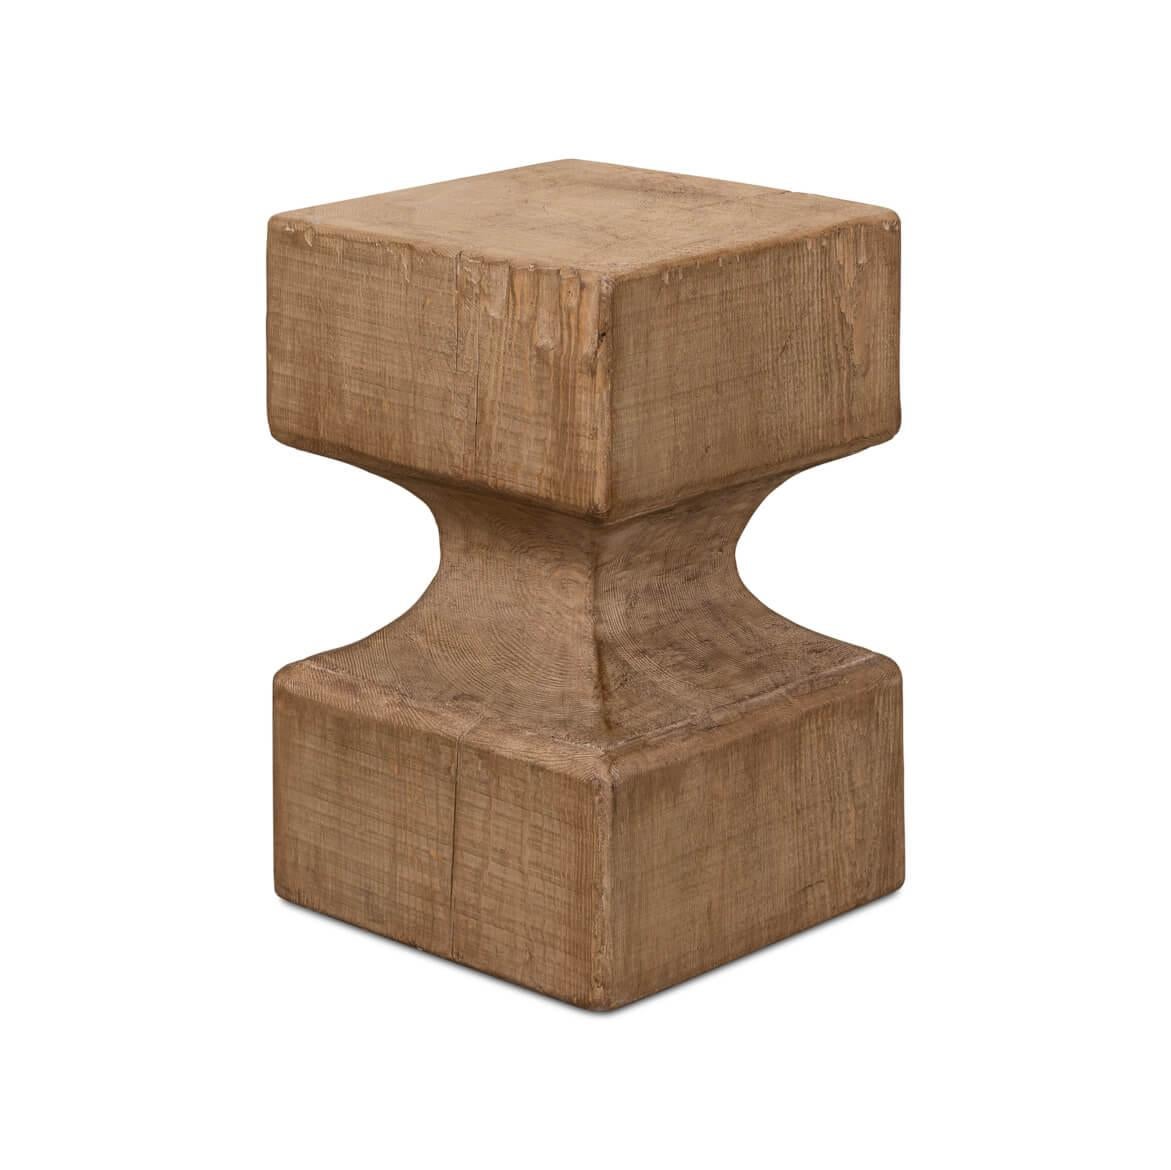 Rustic Wooden Beam Stool For Sale